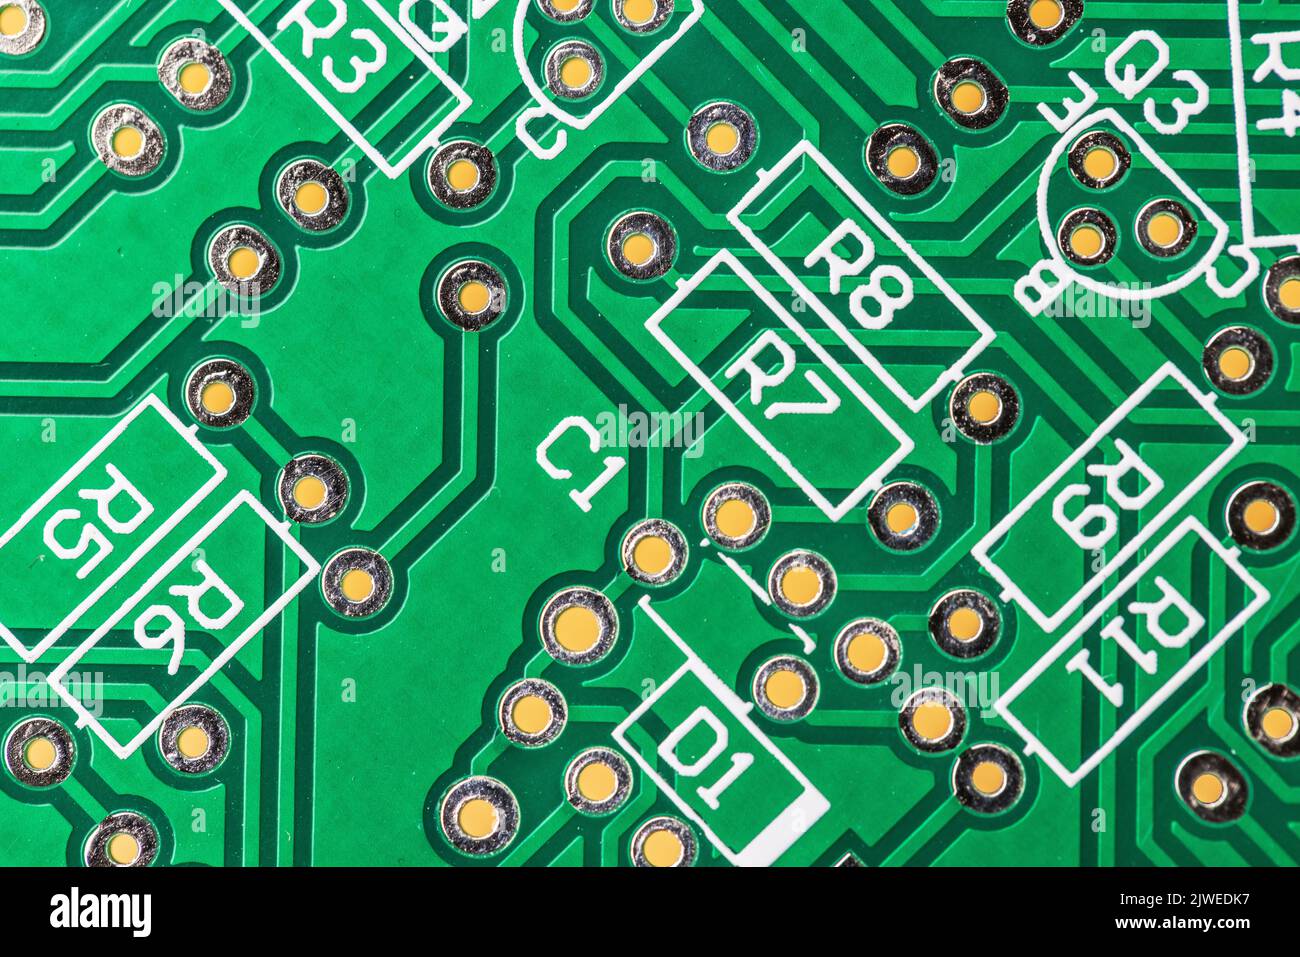 Green Computer Chip Technology close up Stock Photo